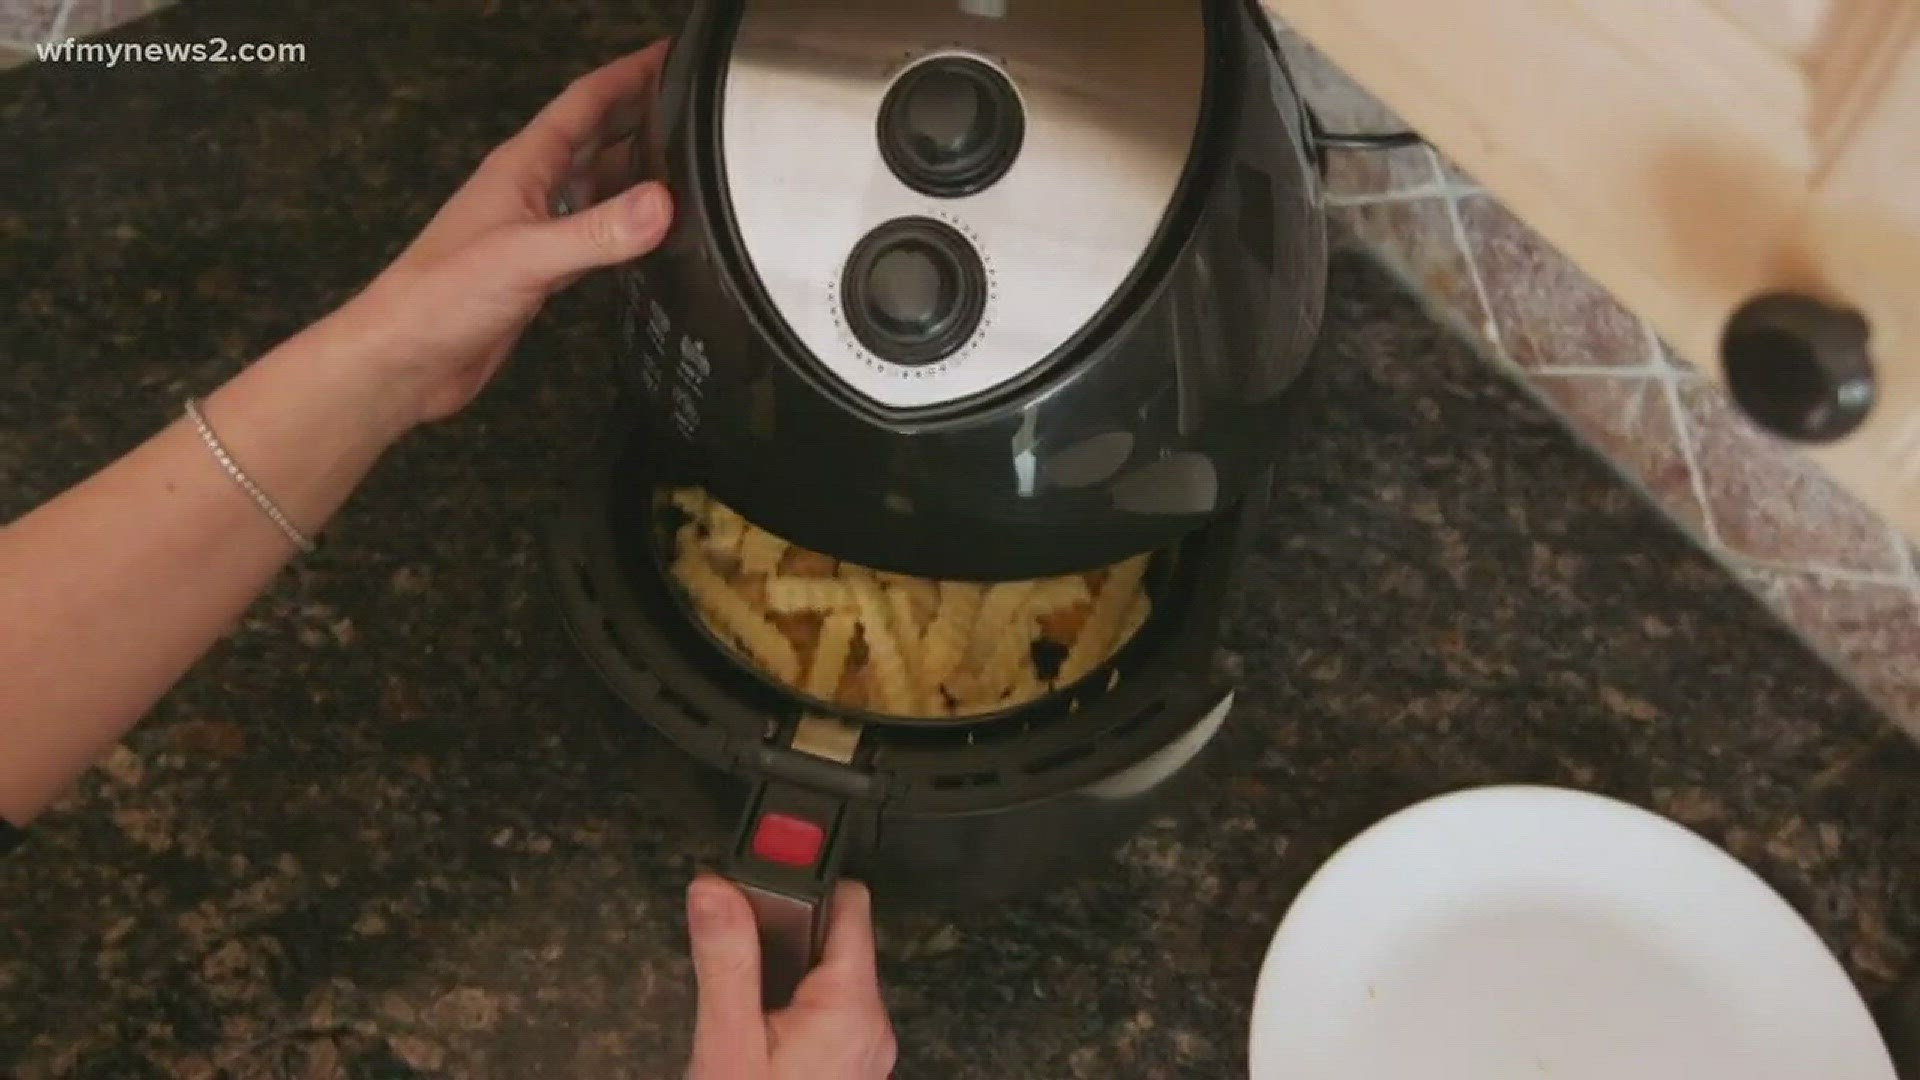 Consumer Reports tests 8 air fryers to find out which is the best for the money.